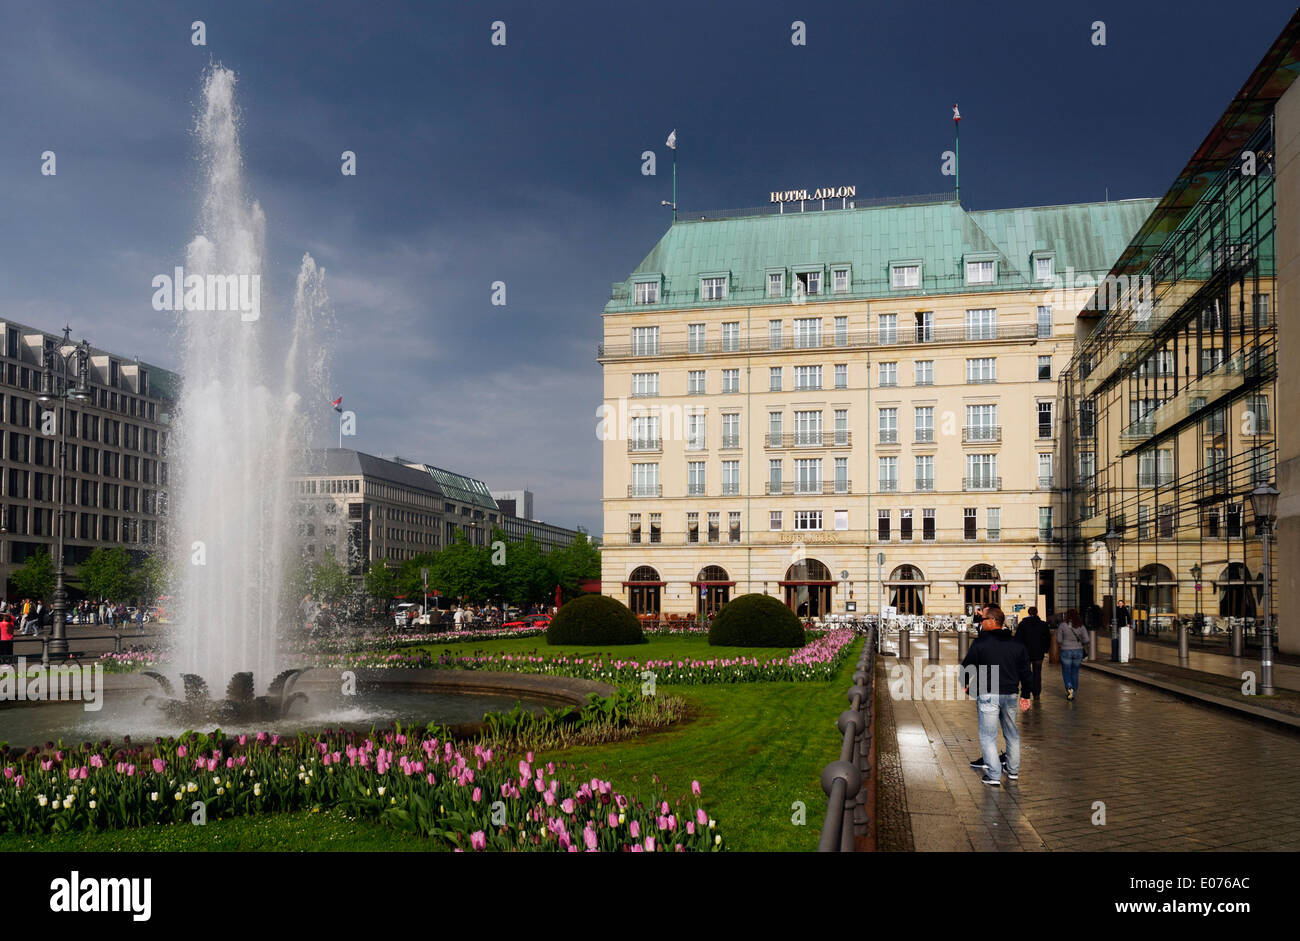 Hotel Adlon in Berlin, with dark skies after a thunderstorm Stock Photo